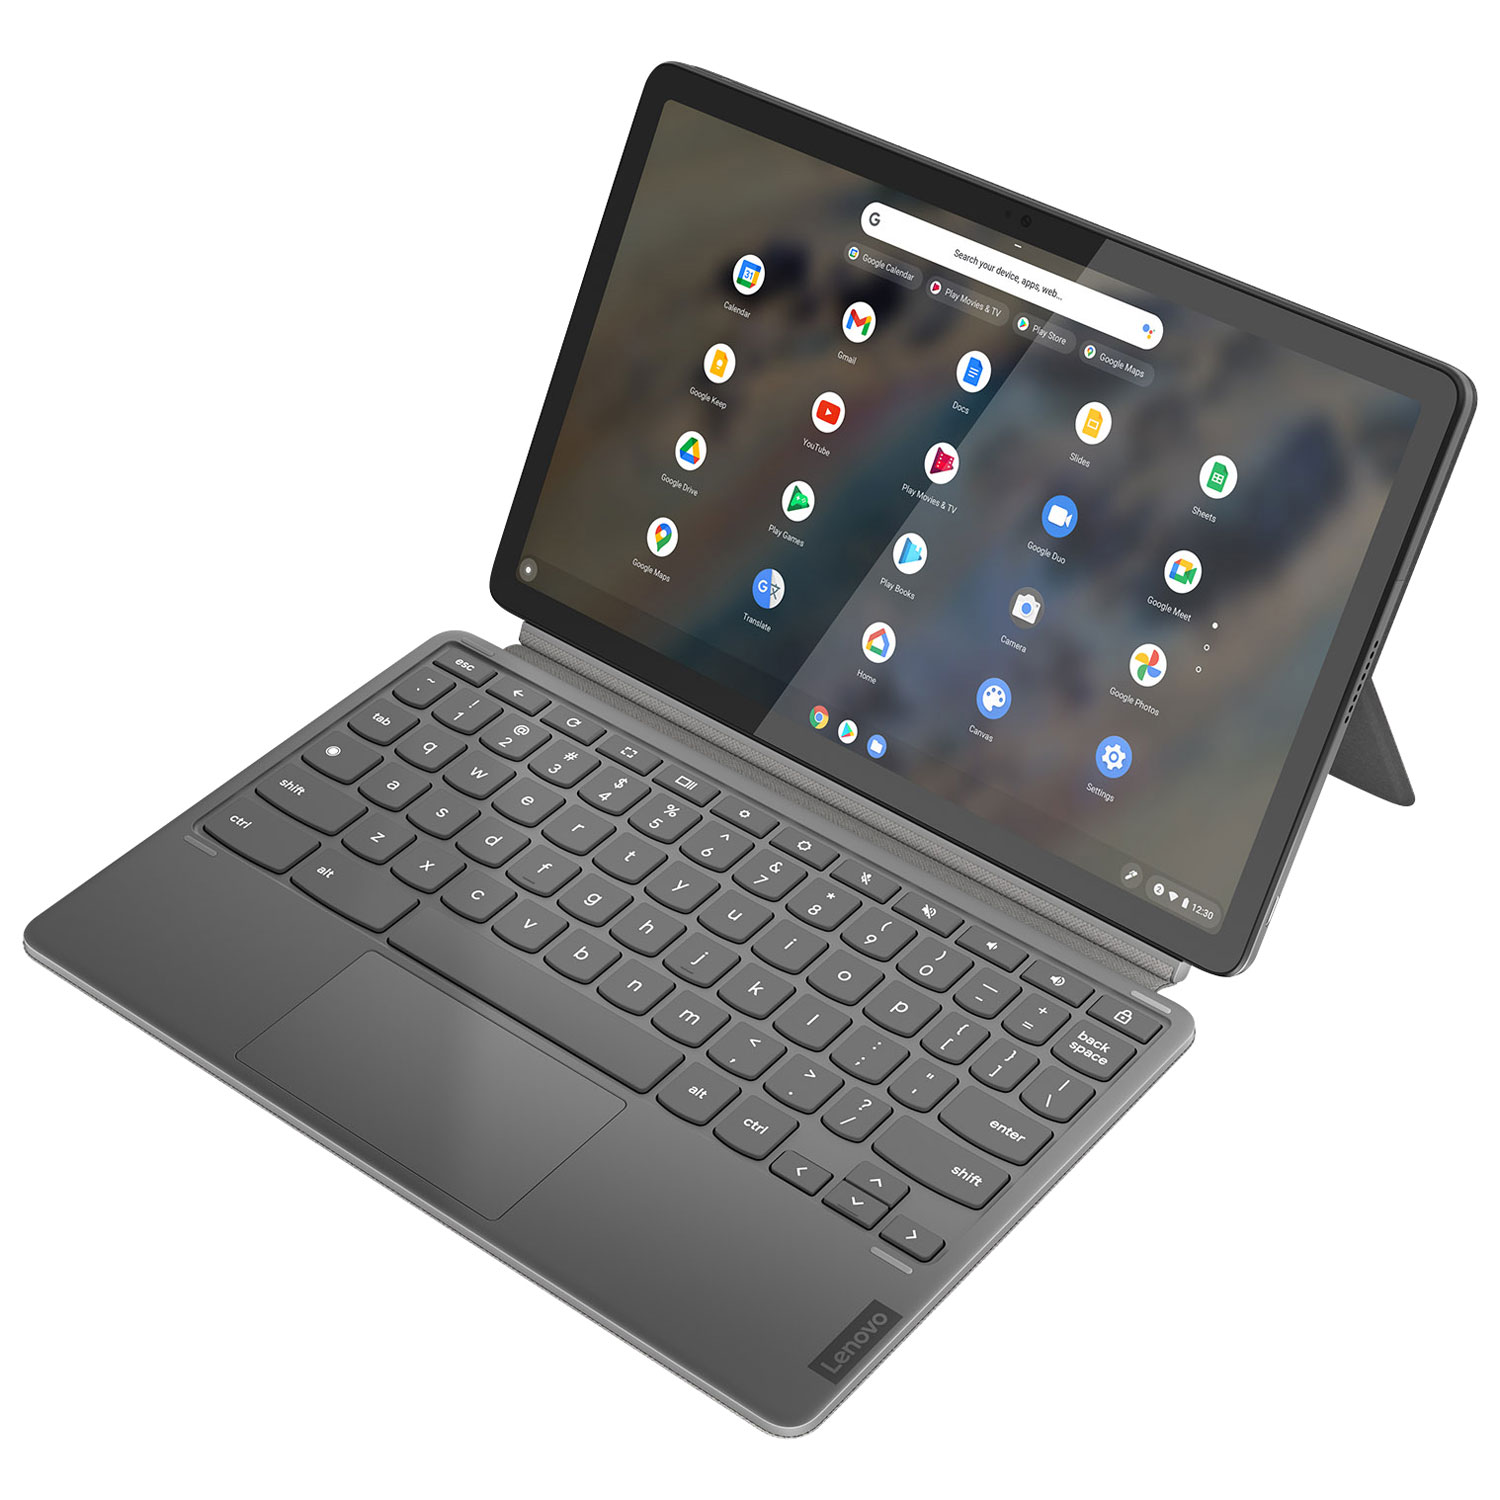 Lenovo IdeaPad Duet 3 128GB Chrome OS Tablet w/ SnapDragon 7c 8-Core  Processor - Storm Grey - Only at Best Buy